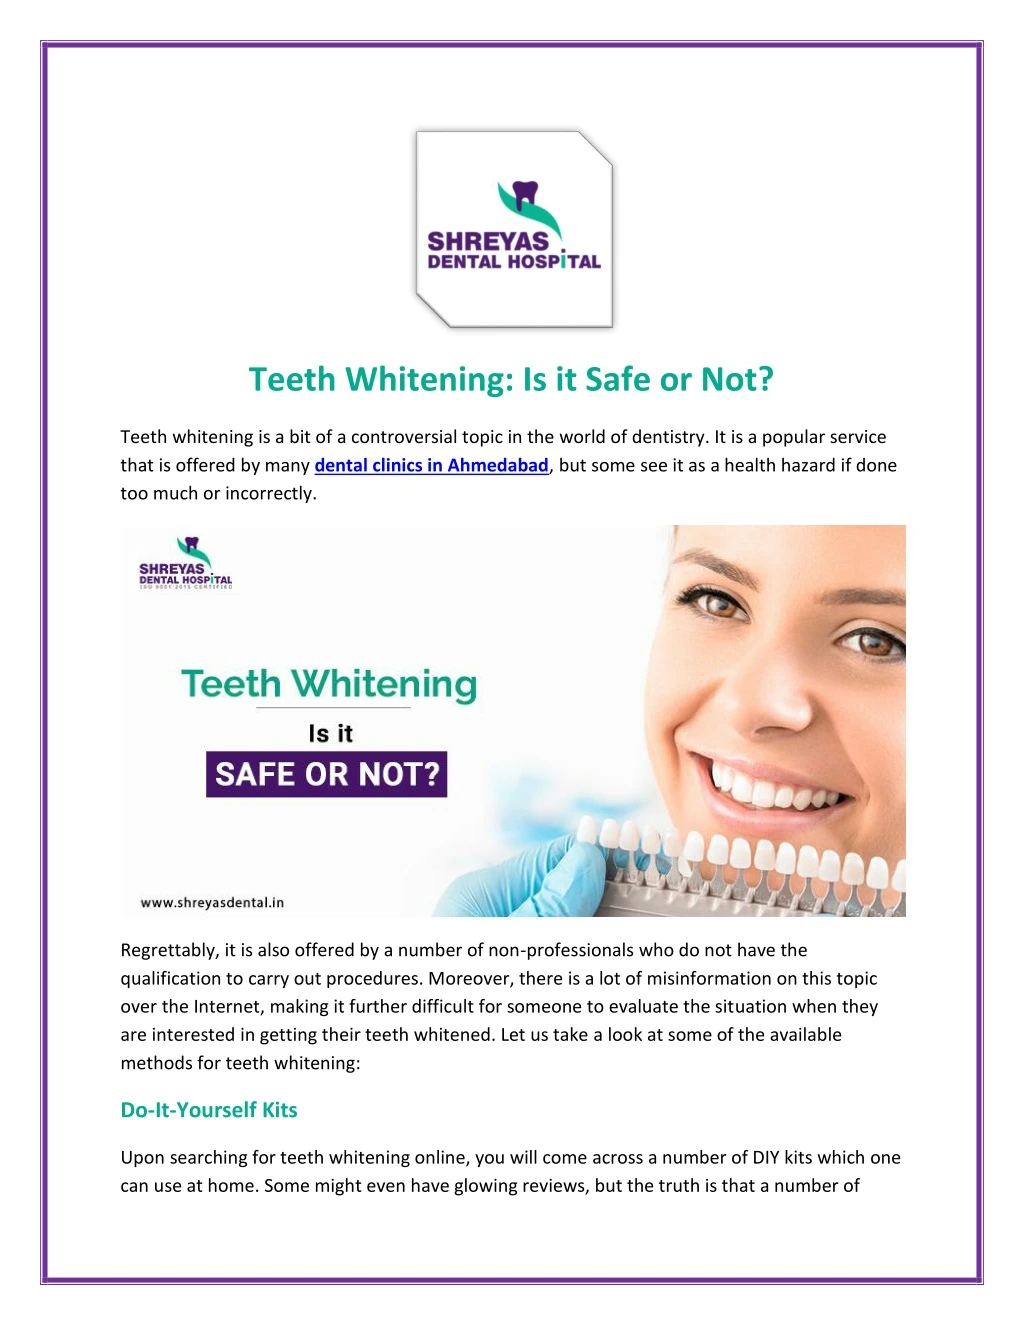 teeth whitening is it safe or not